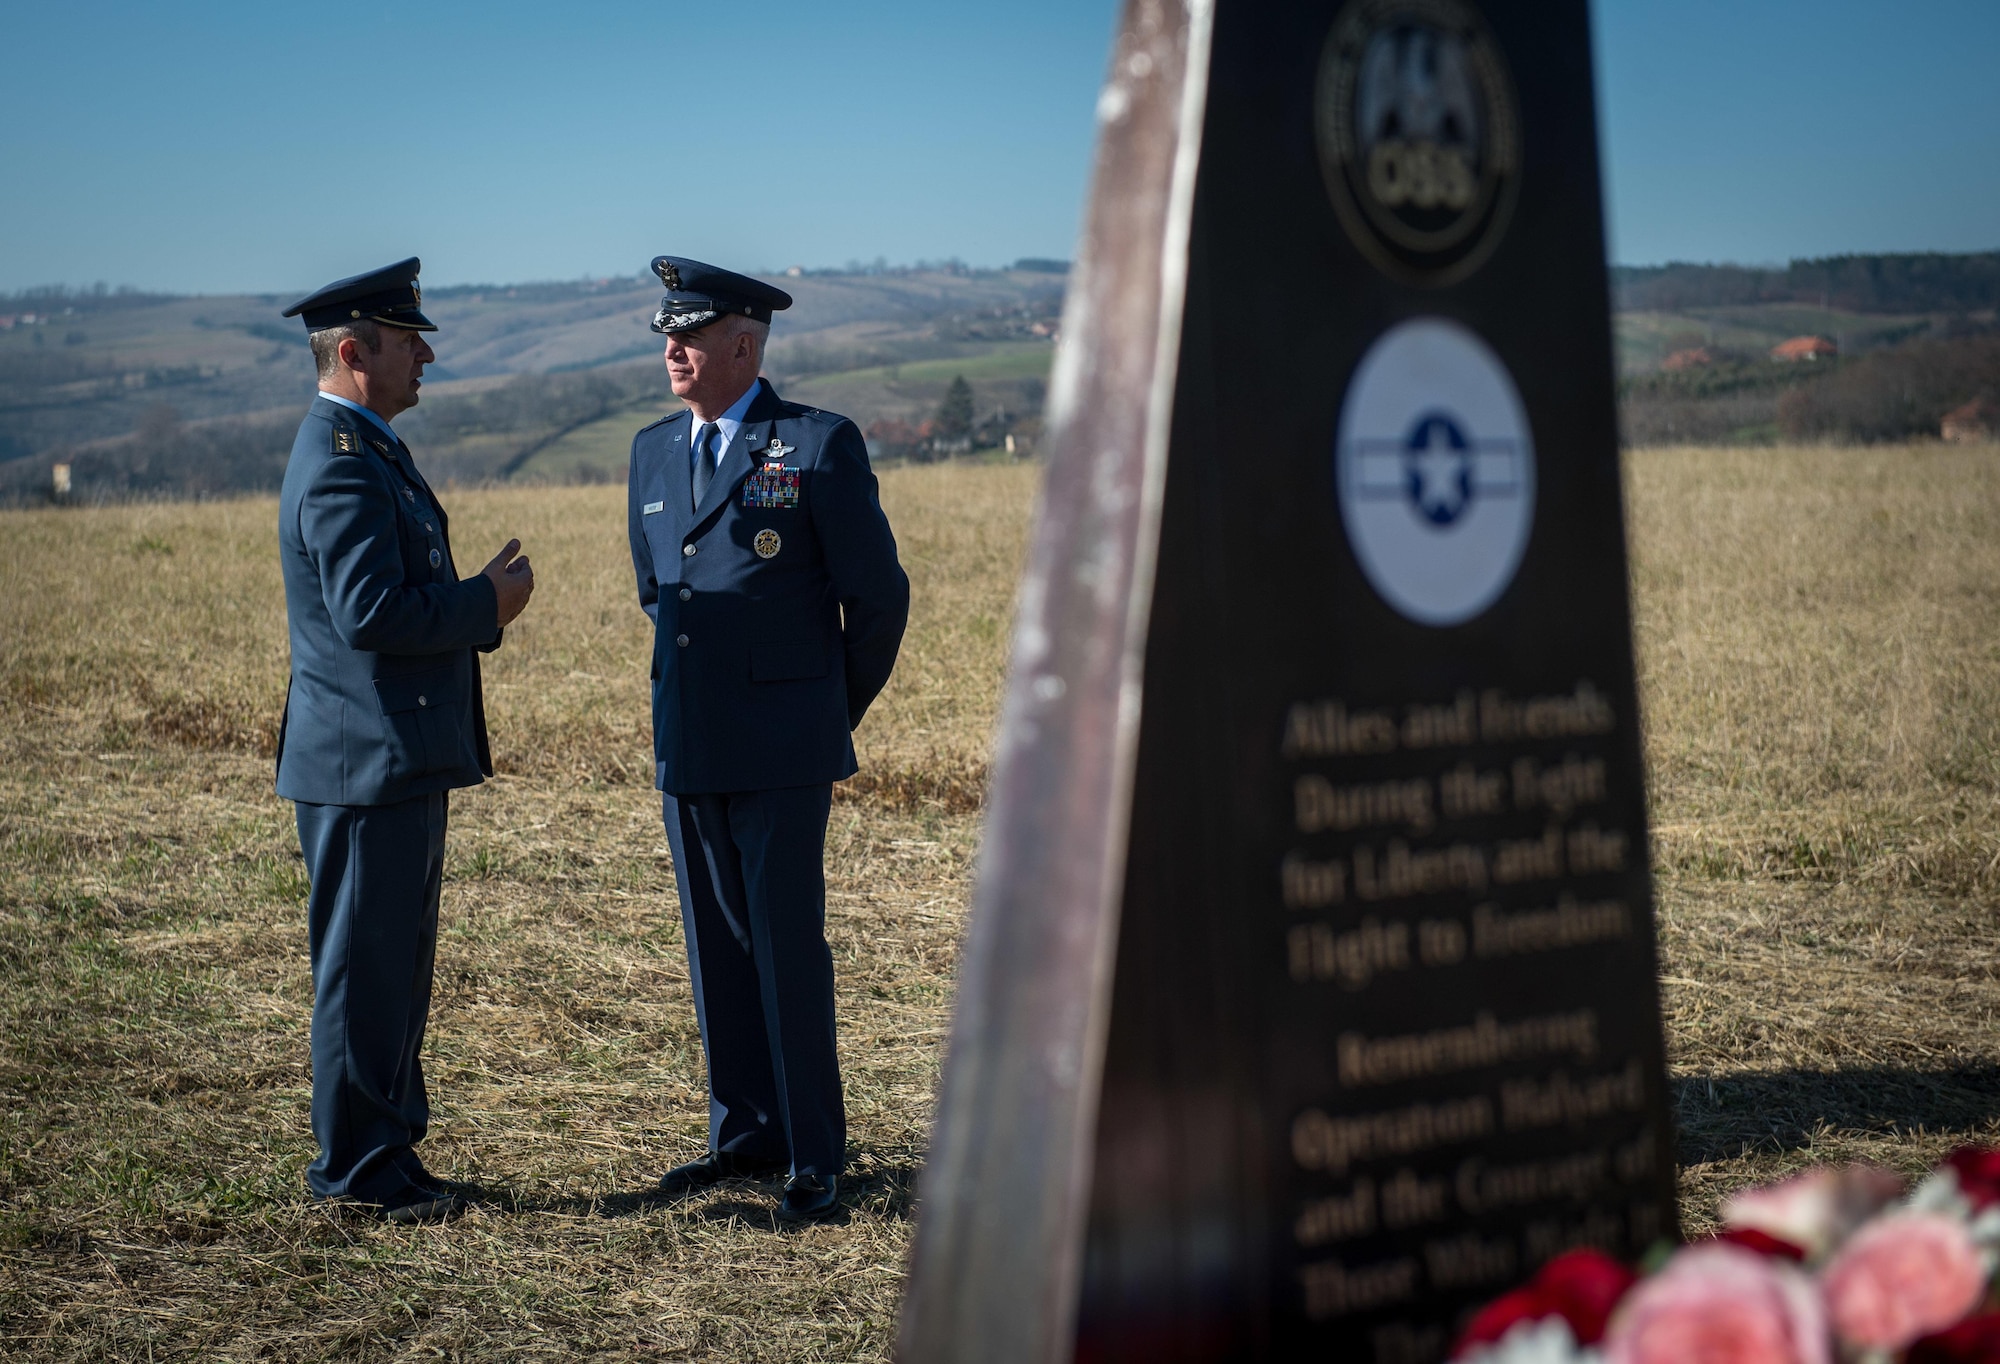 Brig. Gen. Randy Huston, 3rd Air Force mobilization assistant, speaks to his Serbian Armed Forces counterpart at the Operation Halyard memorial in Pranjani, Serbia, Nov. 17, 2016.  The U.S. State Department, U.S. Air Force, Royal Air Force and Serbian Armed Forces were in attendance to commemorate the event and the heroic actions of the Serbian people. Operation Halyard was the rescue mission to save more than 500 Allied Airmen who were shot down over Serbia during WWII. The local Serbians housed and fed the downed Airmen, while also keeping their presence a secret from the German forces searching for them. The operation was, and still is, the largest rescue of downed Americans. (U.S. Air Force photo by Tech. Sgt. Ryan Crane)